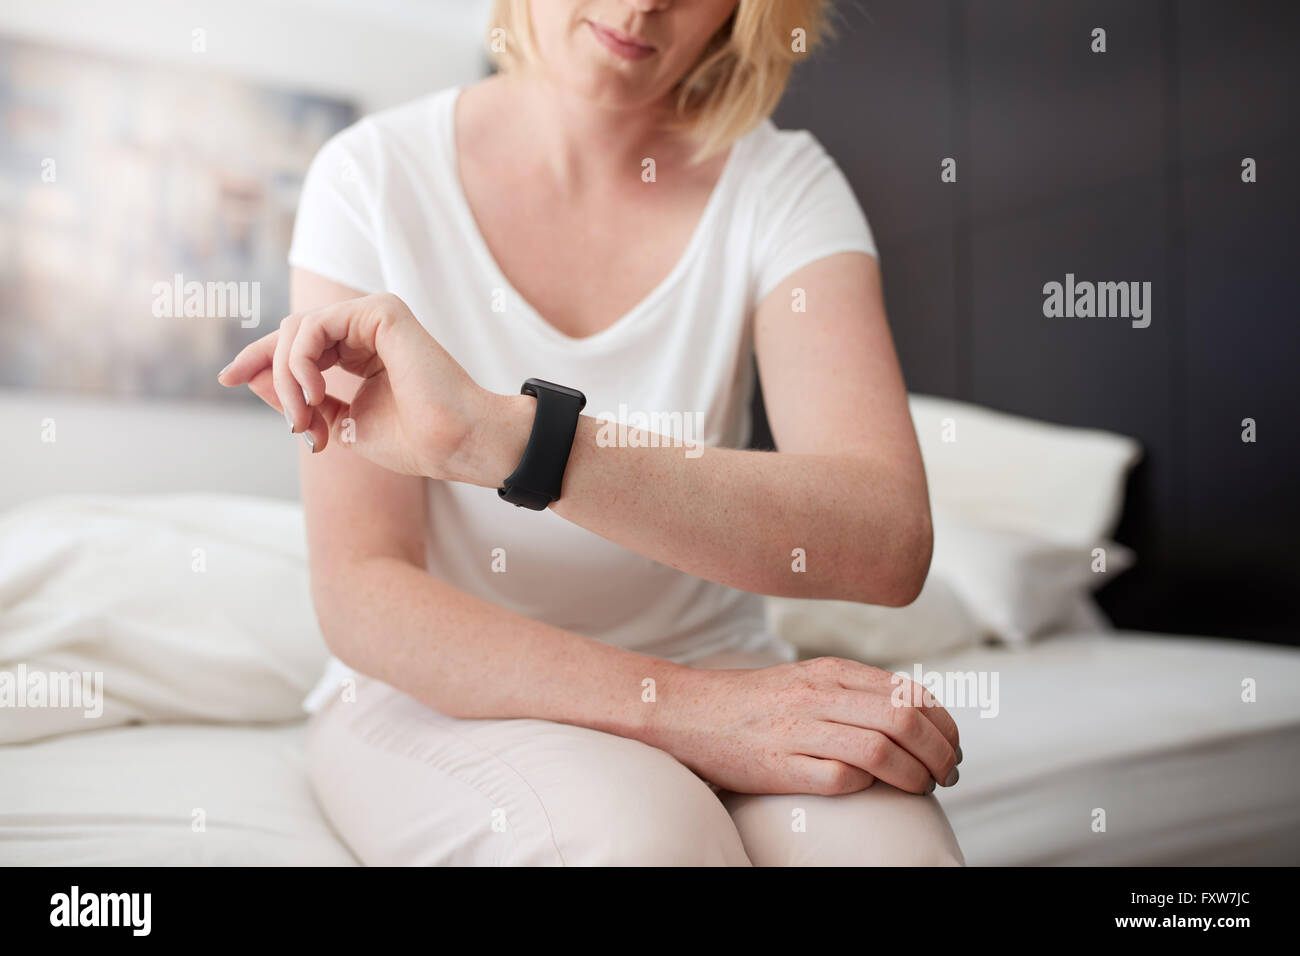 Cropped shot of a woman sitting on bed checking time on her wrist watch, she is in bedroom at home. Stock Photo